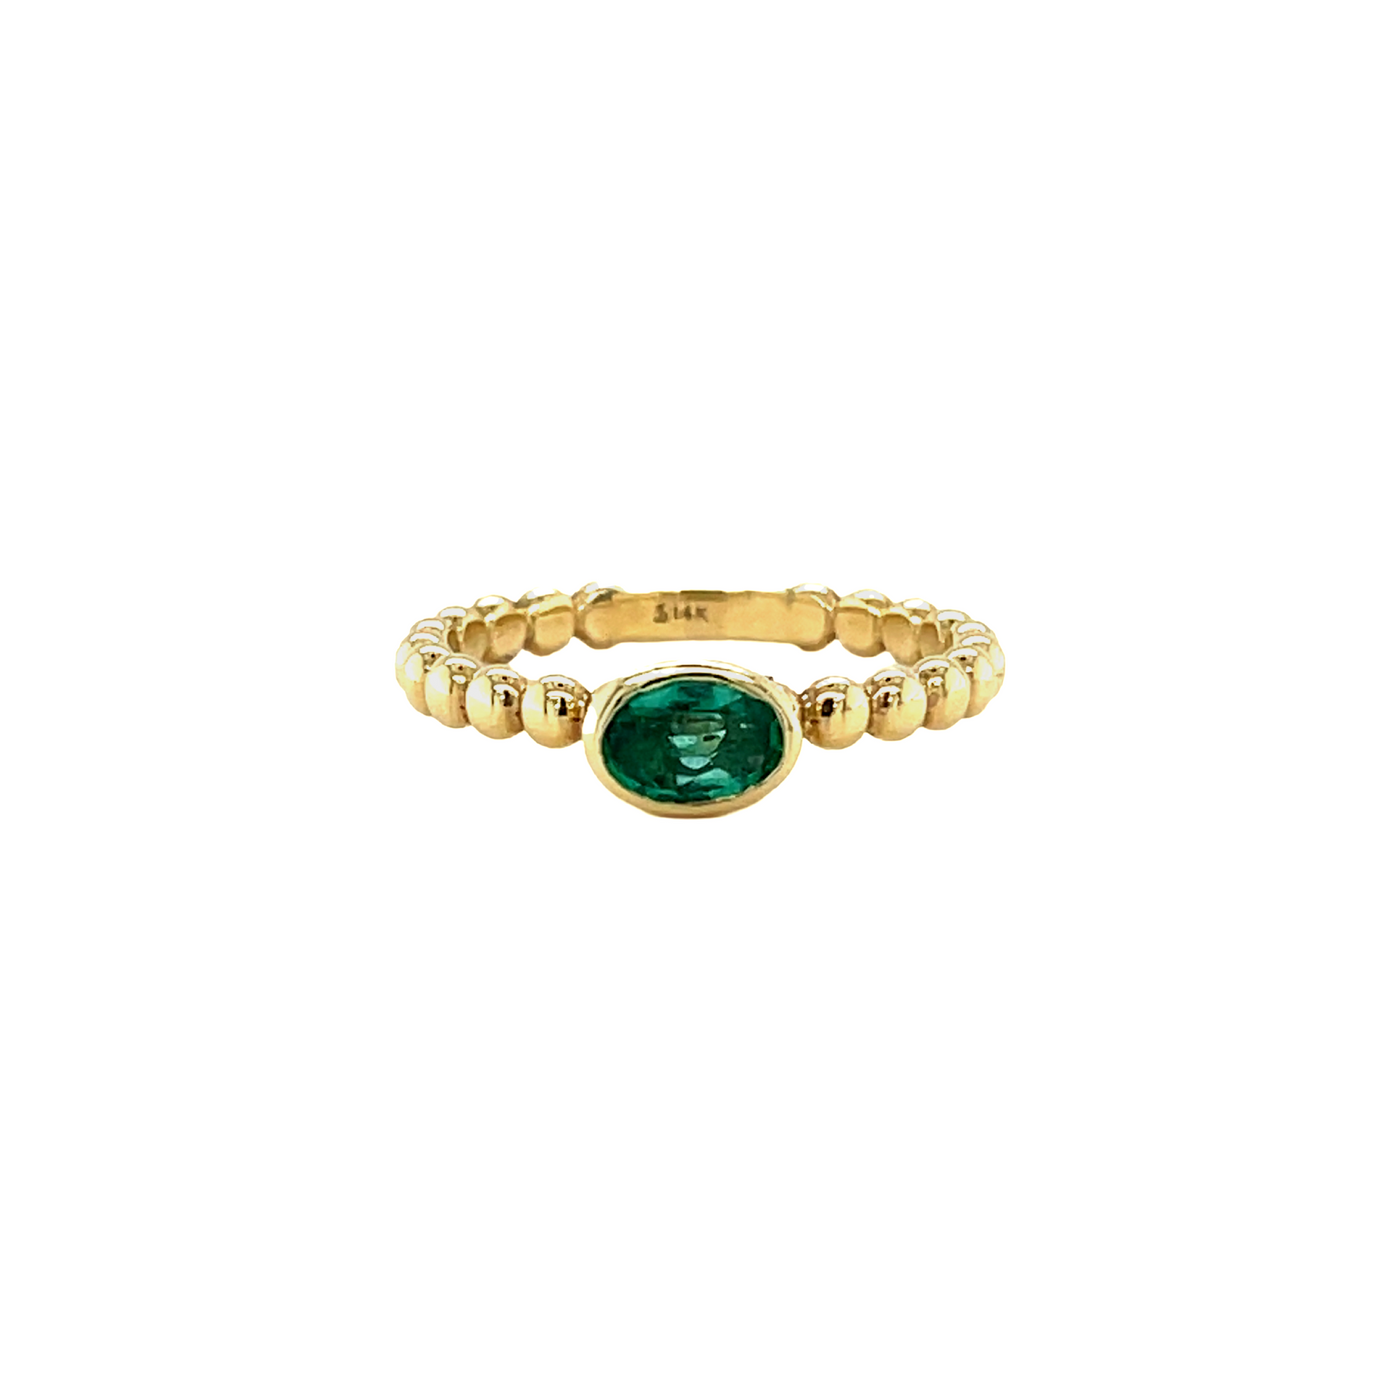 Emerald Beaded Stacking Ring